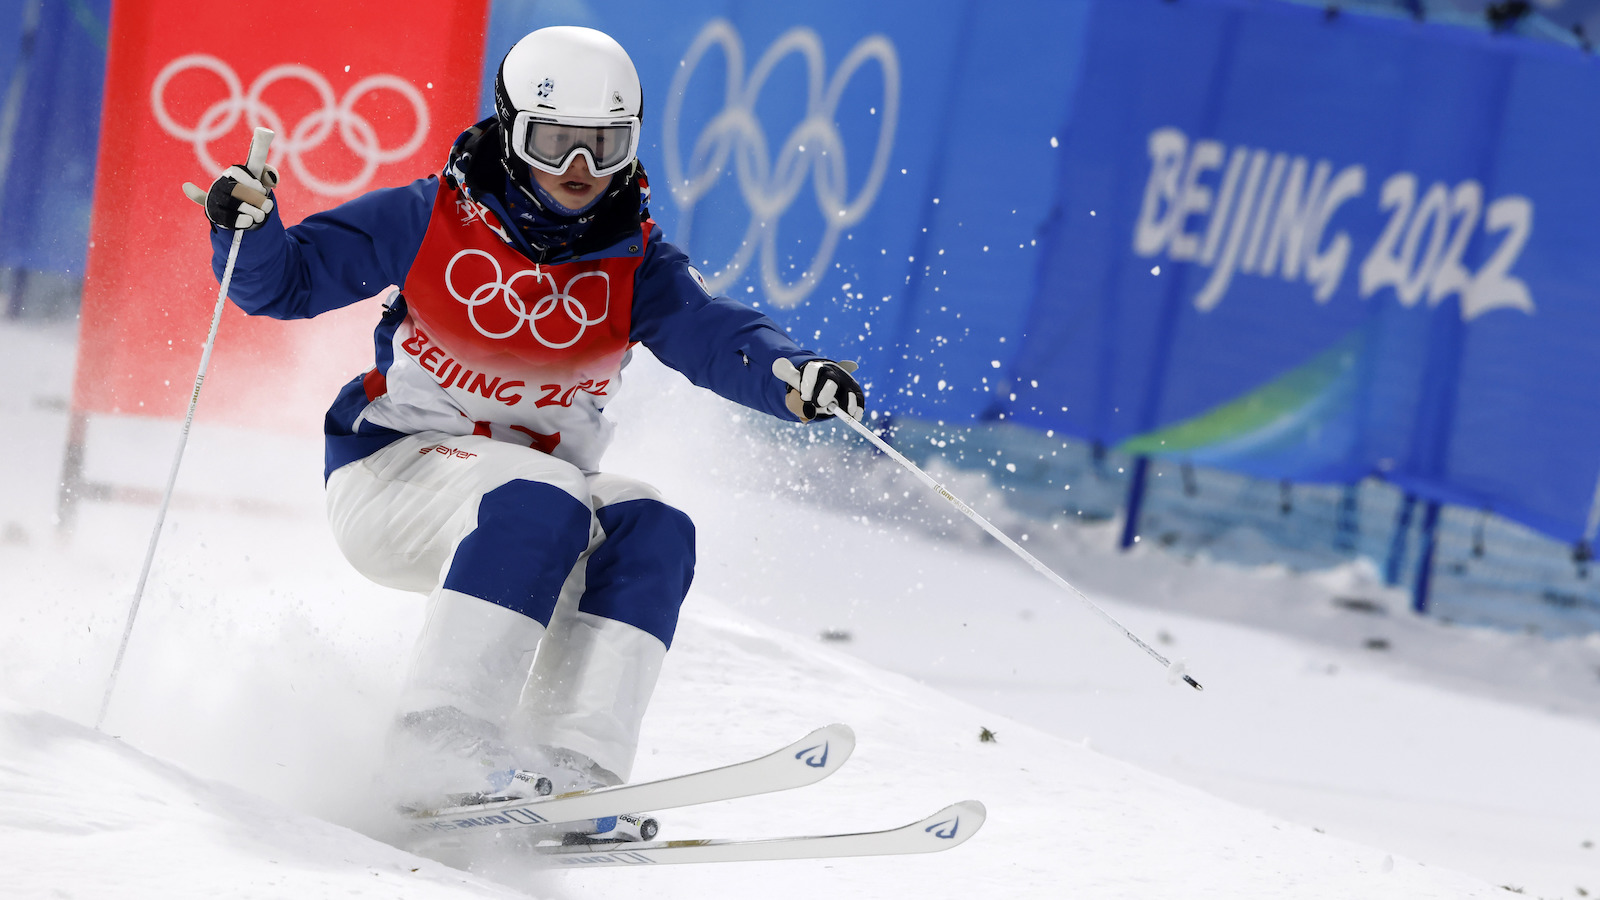 What is Combined Downhill in the Winter Olympics?